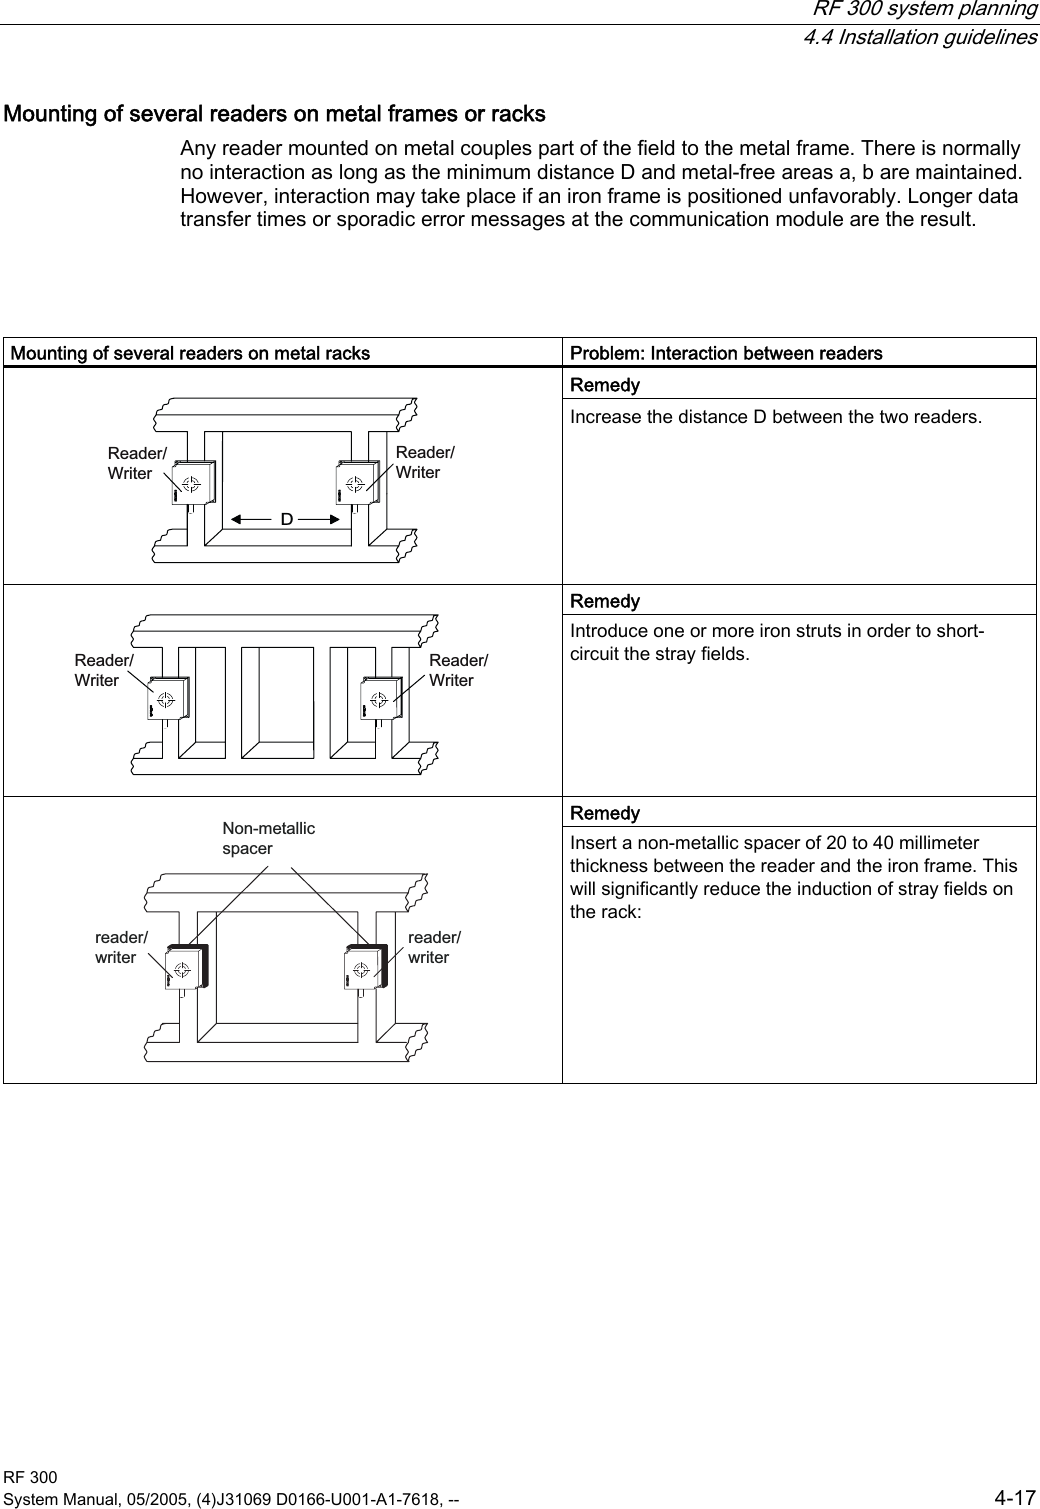  RF 300 system planning  4.4 Installation guidelines RF 300 System Manual, 05/2005, (4)J31069 D0166-U001-A1-7618, --  4-17 Mounting of several readers on metal frames or racks Any reader mounted on metal couples part of the field to the metal frame. There is normally no interaction as long as the minimum distance D and metal-free areas a, b are maintained. However, interaction may take place if an iron frame is positioned unfavorably. Longer data transfer times or sporadic error messages at the communication module are the result.   Mounting of several readers on metal racks  Problem: Interaction between readers Remedy  &apos;5HDGHU:ULWHU5HDGHU:ULWHU  Increase the distance D between the two readers. Remedy  5HDGHU:ULWHU5HDGHU:ULWHU  Introduce one or more iron struts in order to short-circuit the stray fields. Remedy  1RQPHWDOOLFVSDFHUUHDGHUZULWHUUHDGHUZULWHU  Insert a non-metallic spacer of 20 to 40 millimeter thickness between the reader and the iron frame. This will significantly reduce the induction of stray fields on the rack:   